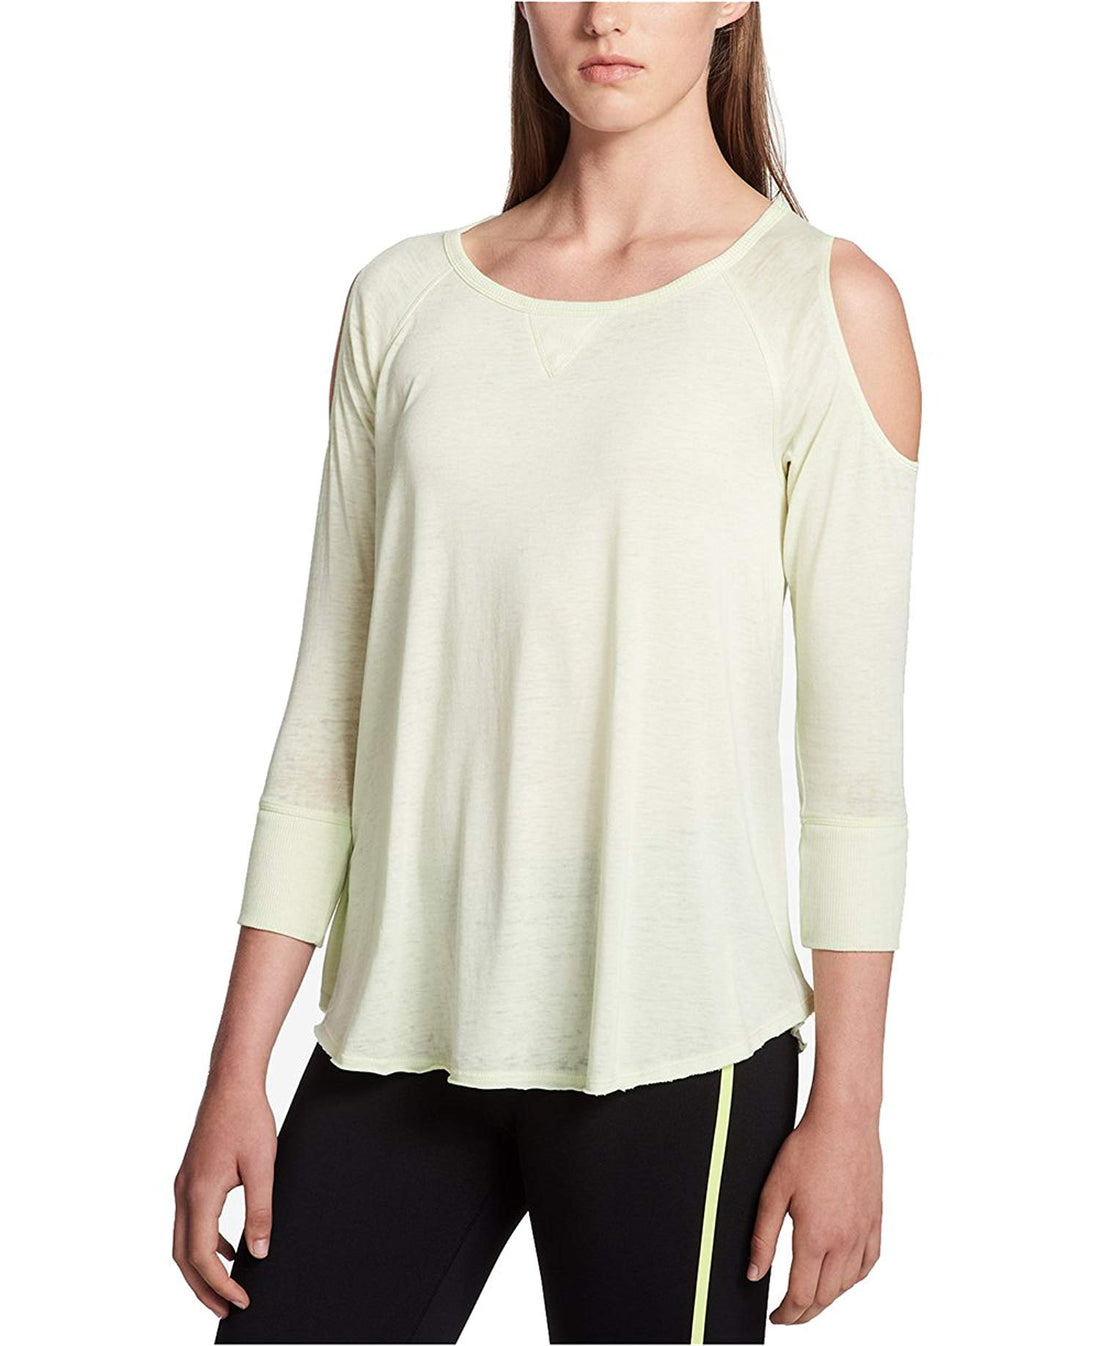 Calvin Klein Womens Performance Cold Shoulder Long Sleeve Top